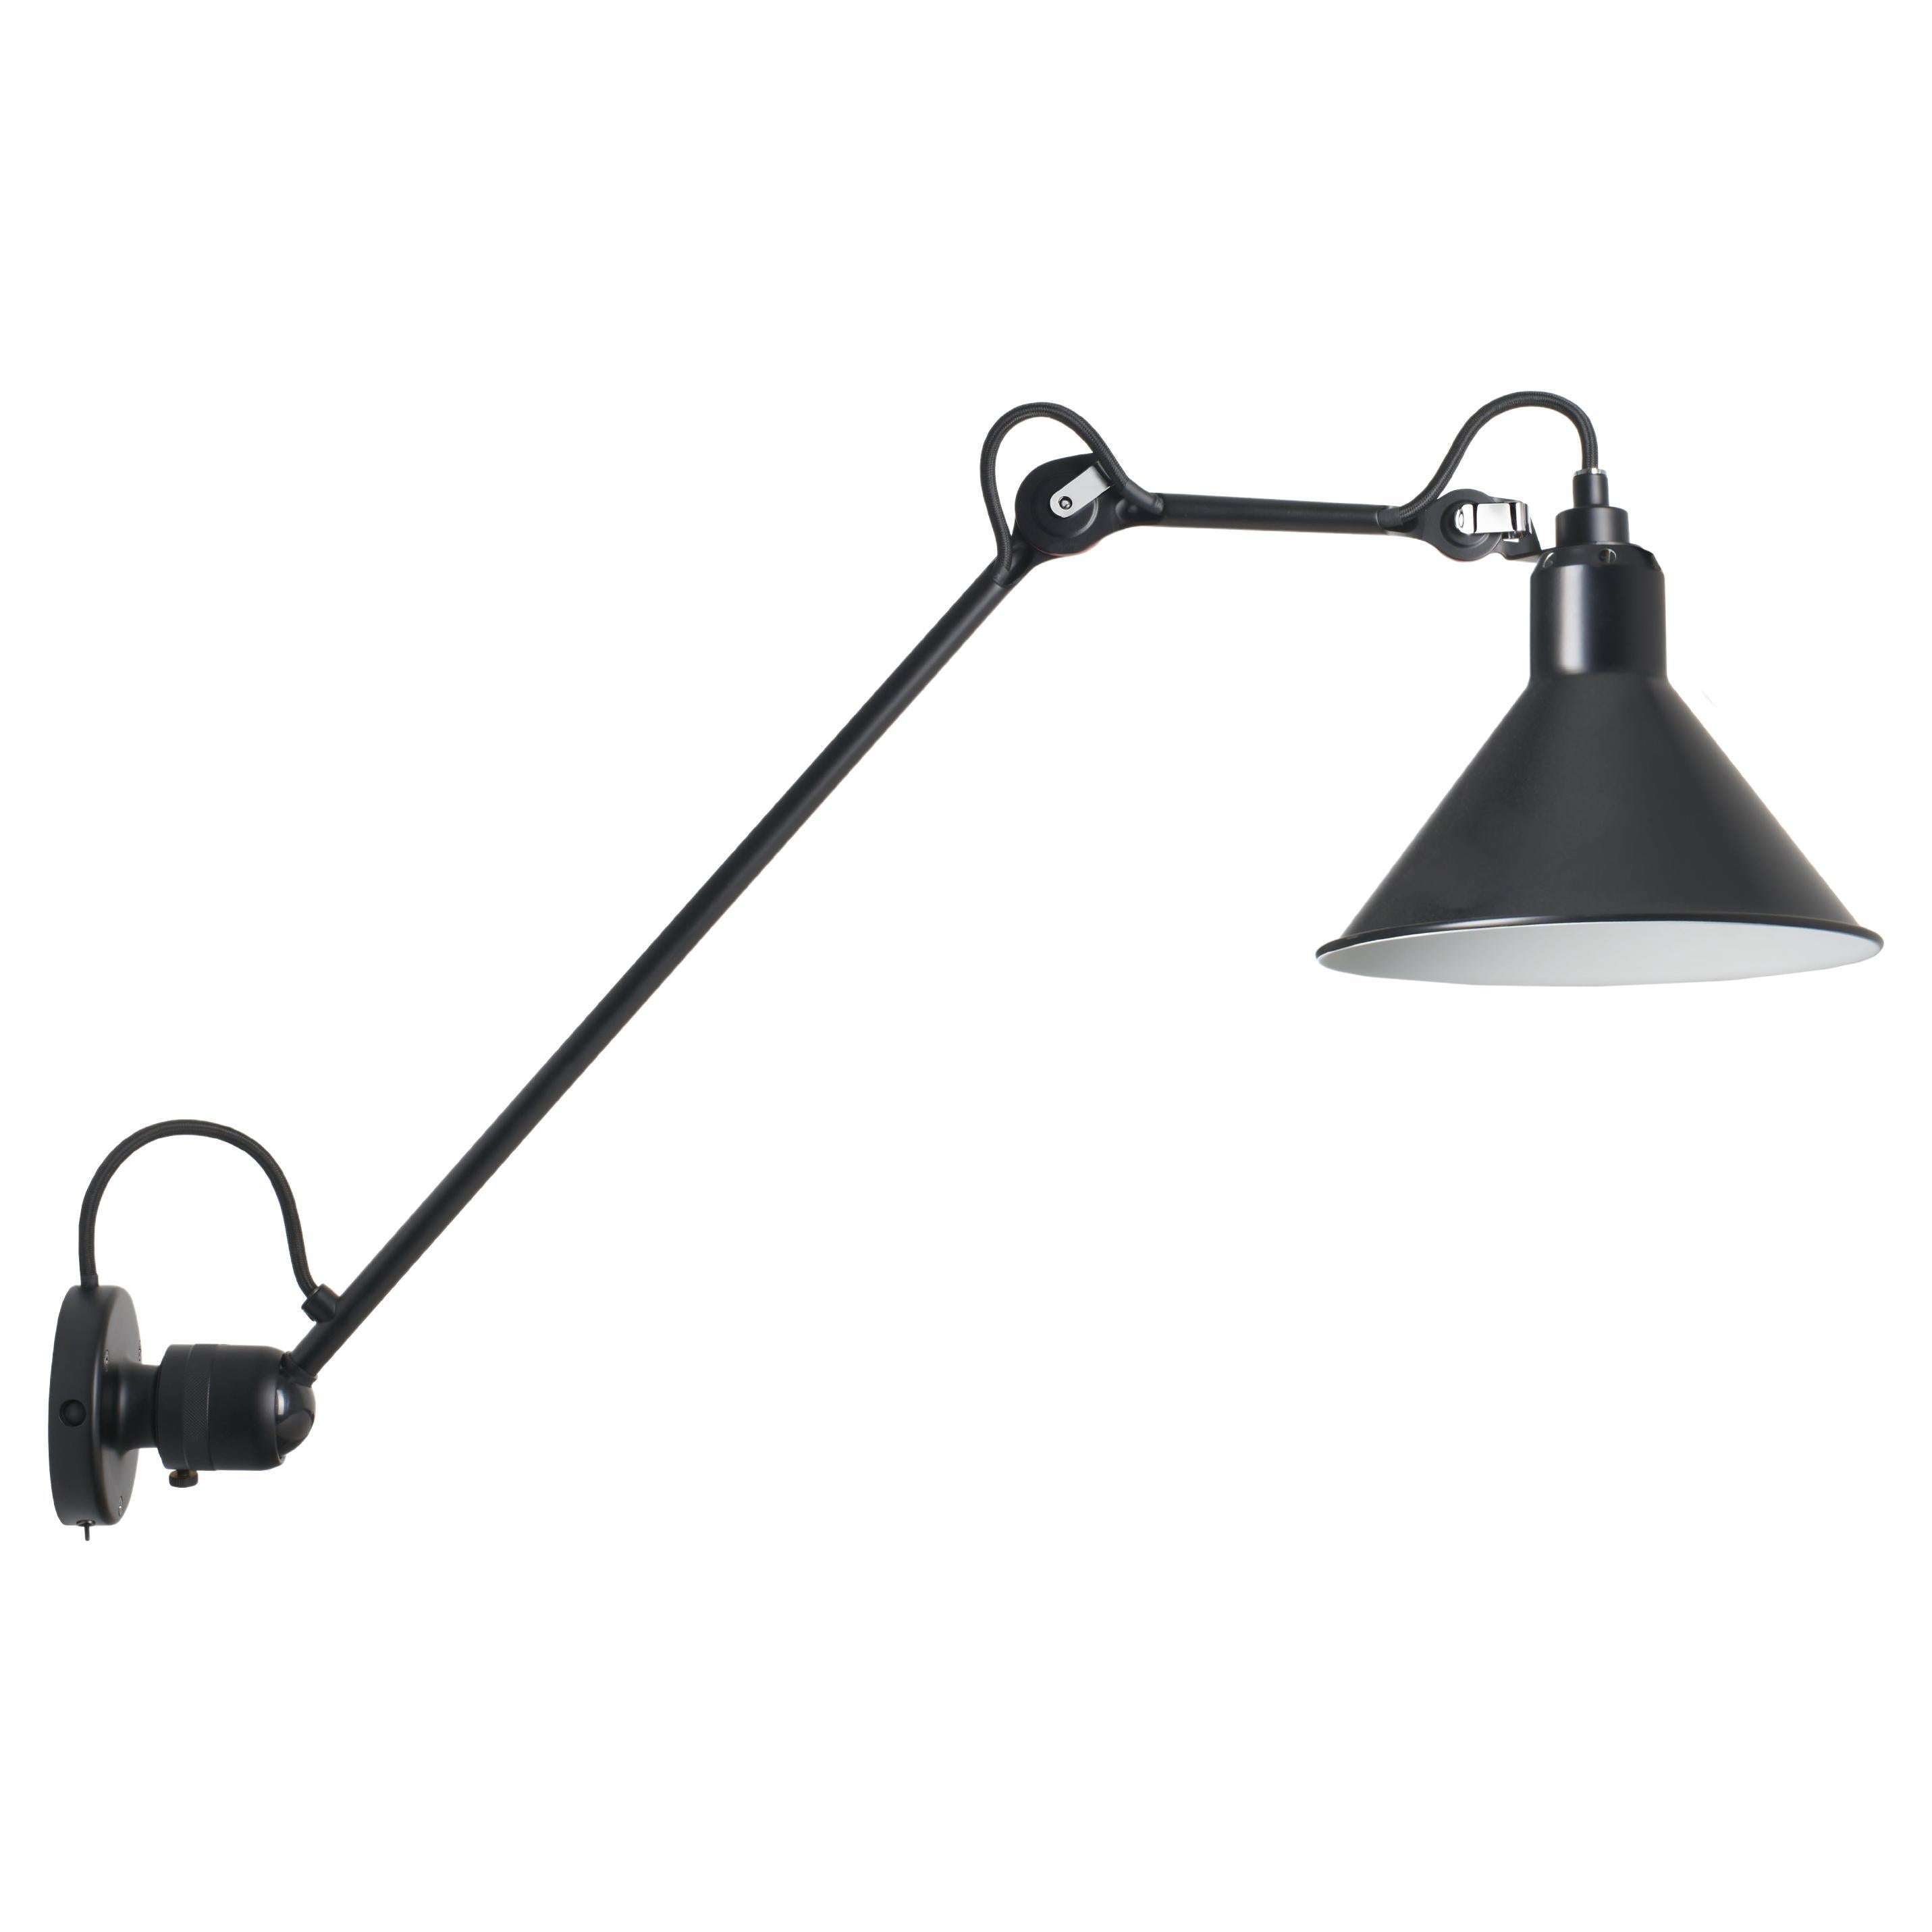 DCW Editions La Lampe Gras N°304 L40 SW Conic Wall Lamp in Black Shade For Sale